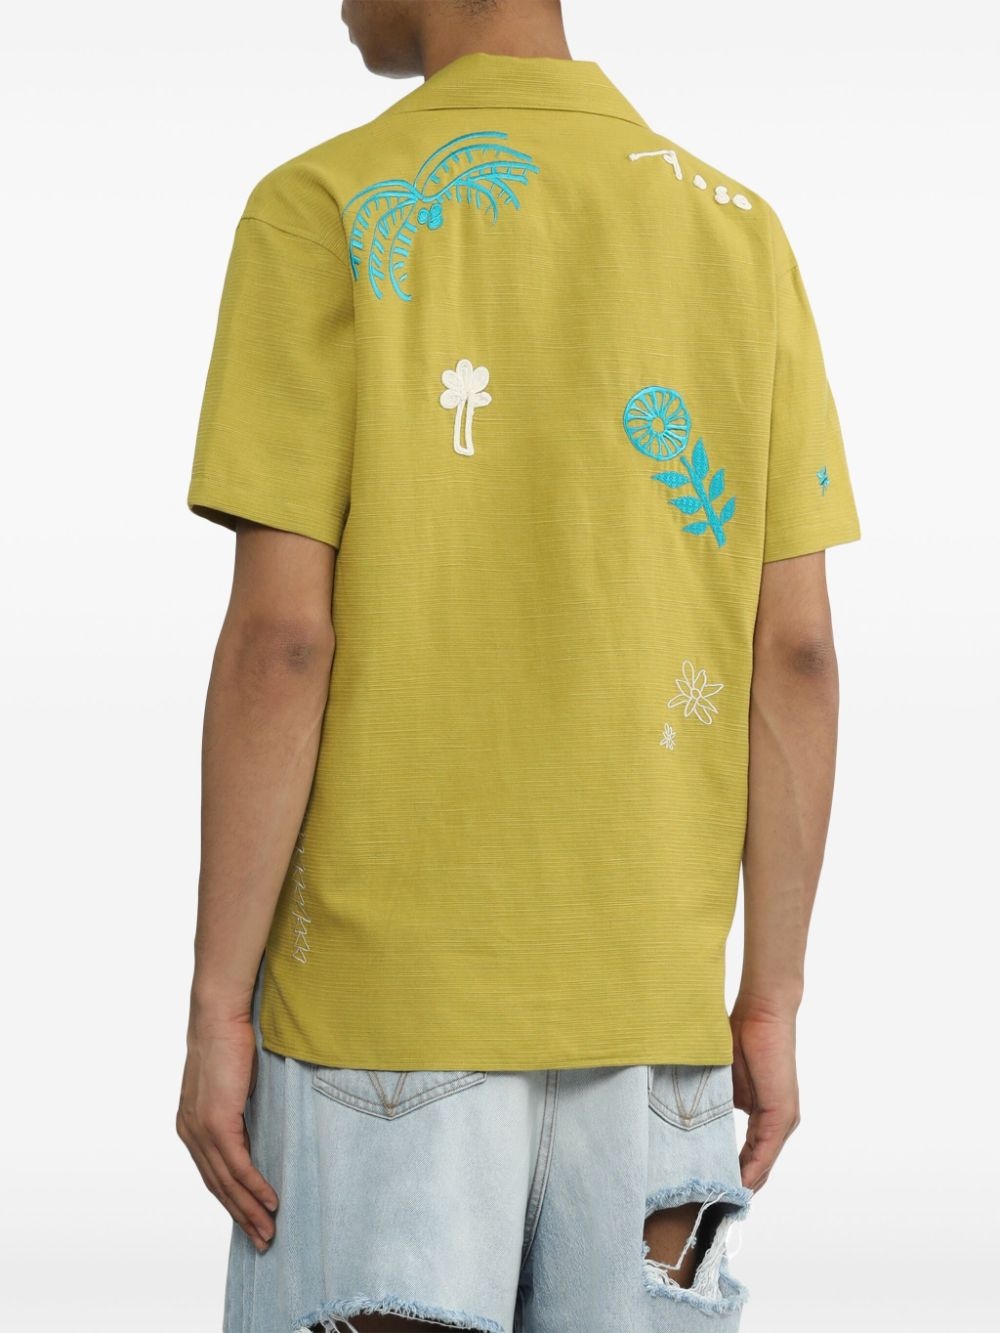 April-embroidery shirt - 4